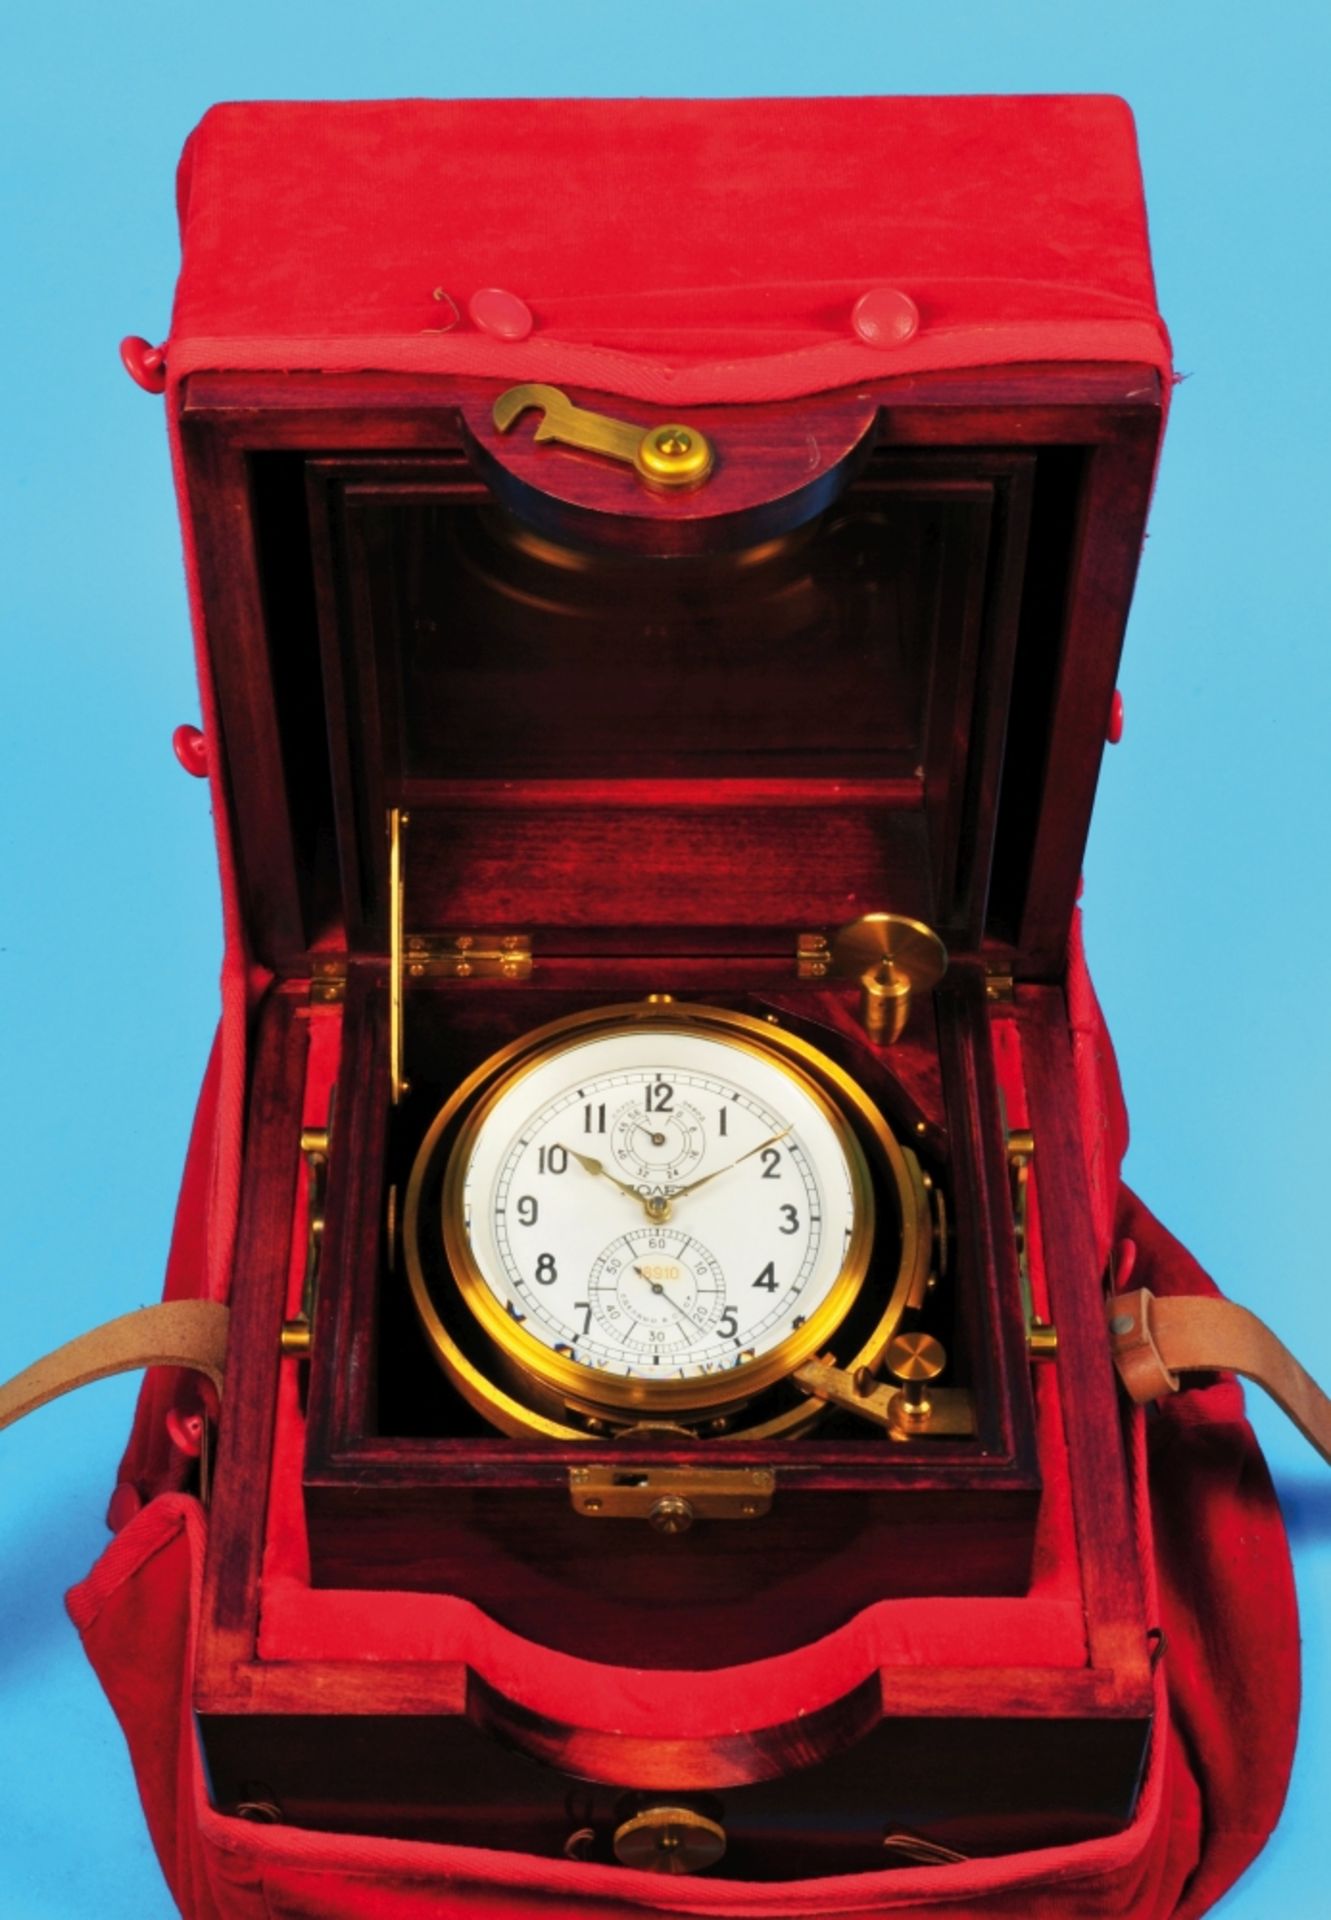 Russian marine chronometer, Poljot, No. 18910, with transport over-case and red velvet cover, 3-piec